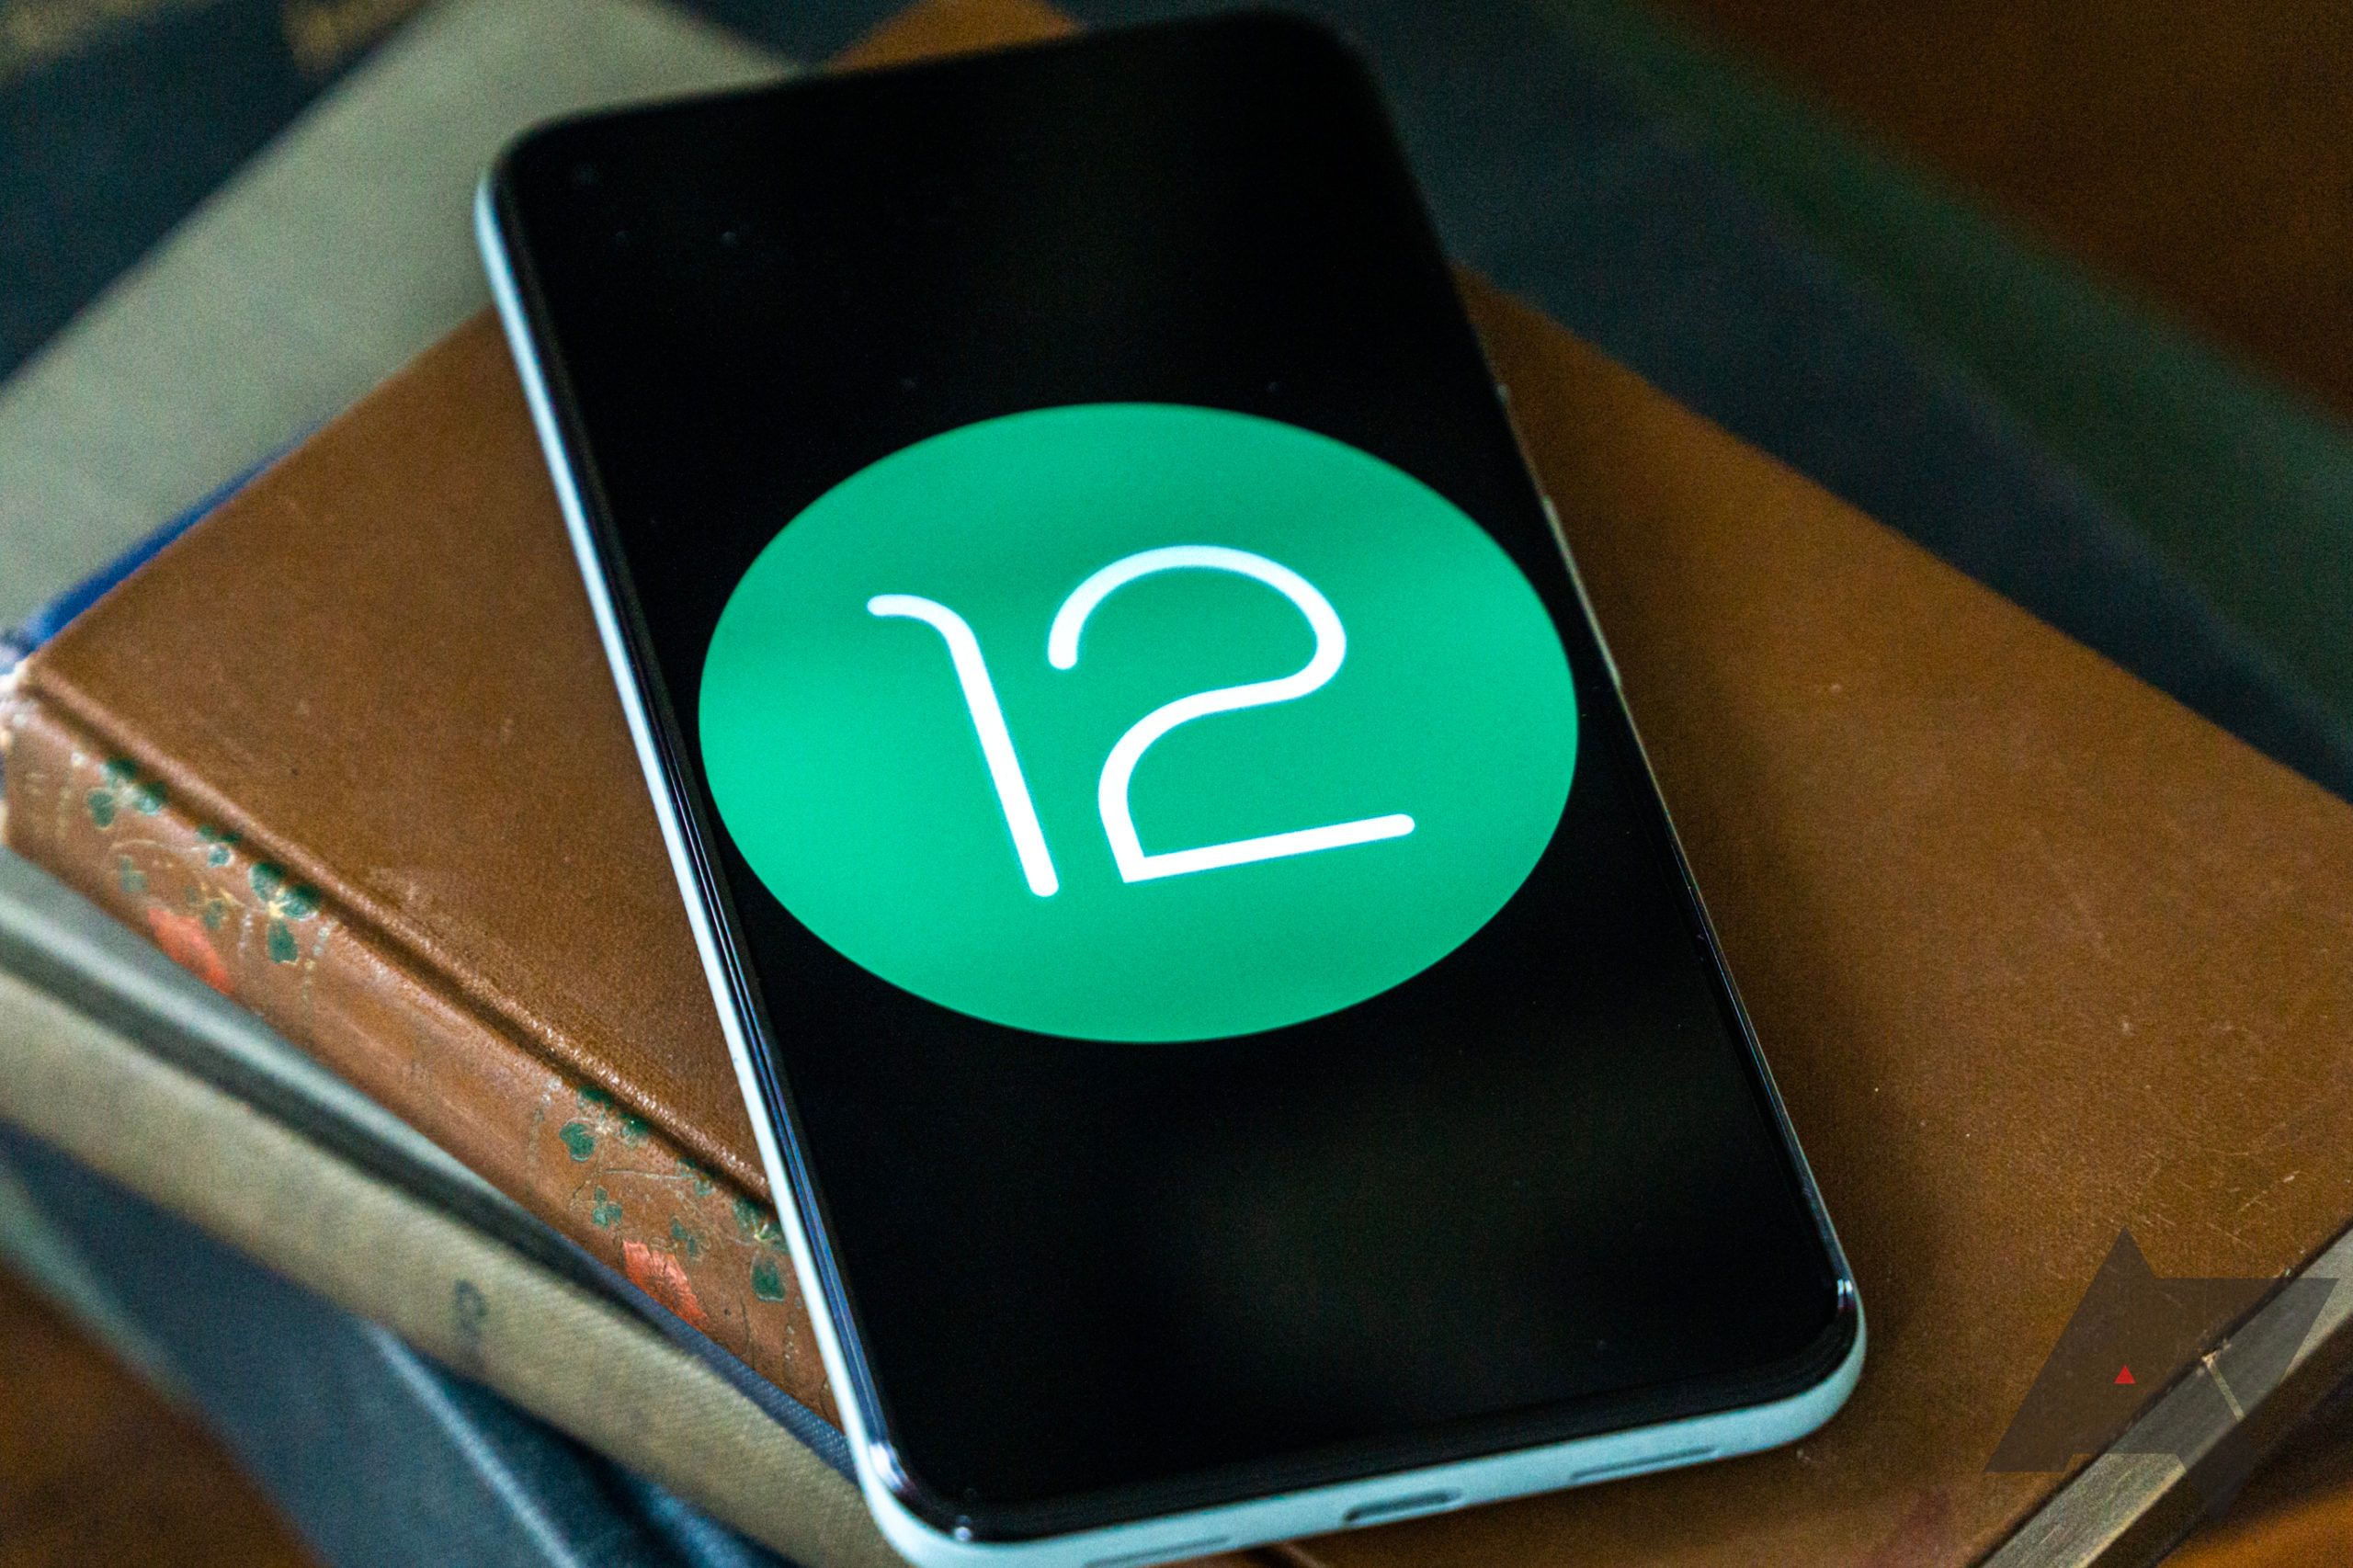 Android 12 Beta 1 has a sparkly new ripple animation for taps